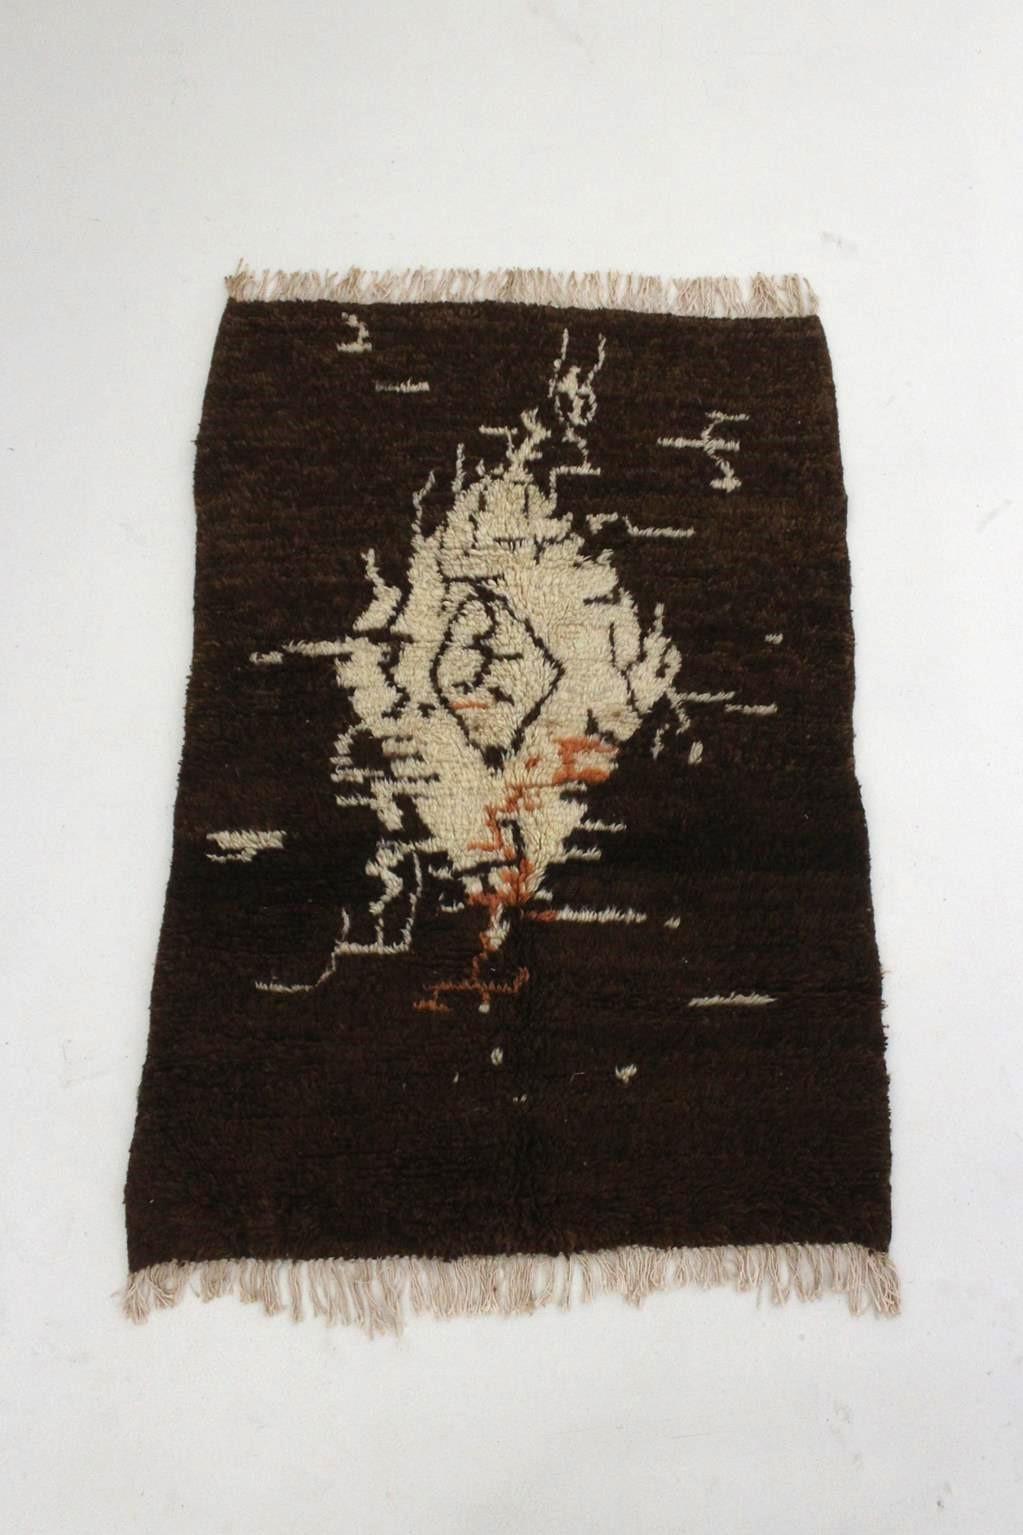 I selected this lovely rug from piles of carpets as I fell in love with its crazy design! Real vintage berber rugs often come with the classical diamond pattern which is a symbol for feminity, but I think the work on this one is quite unusual,